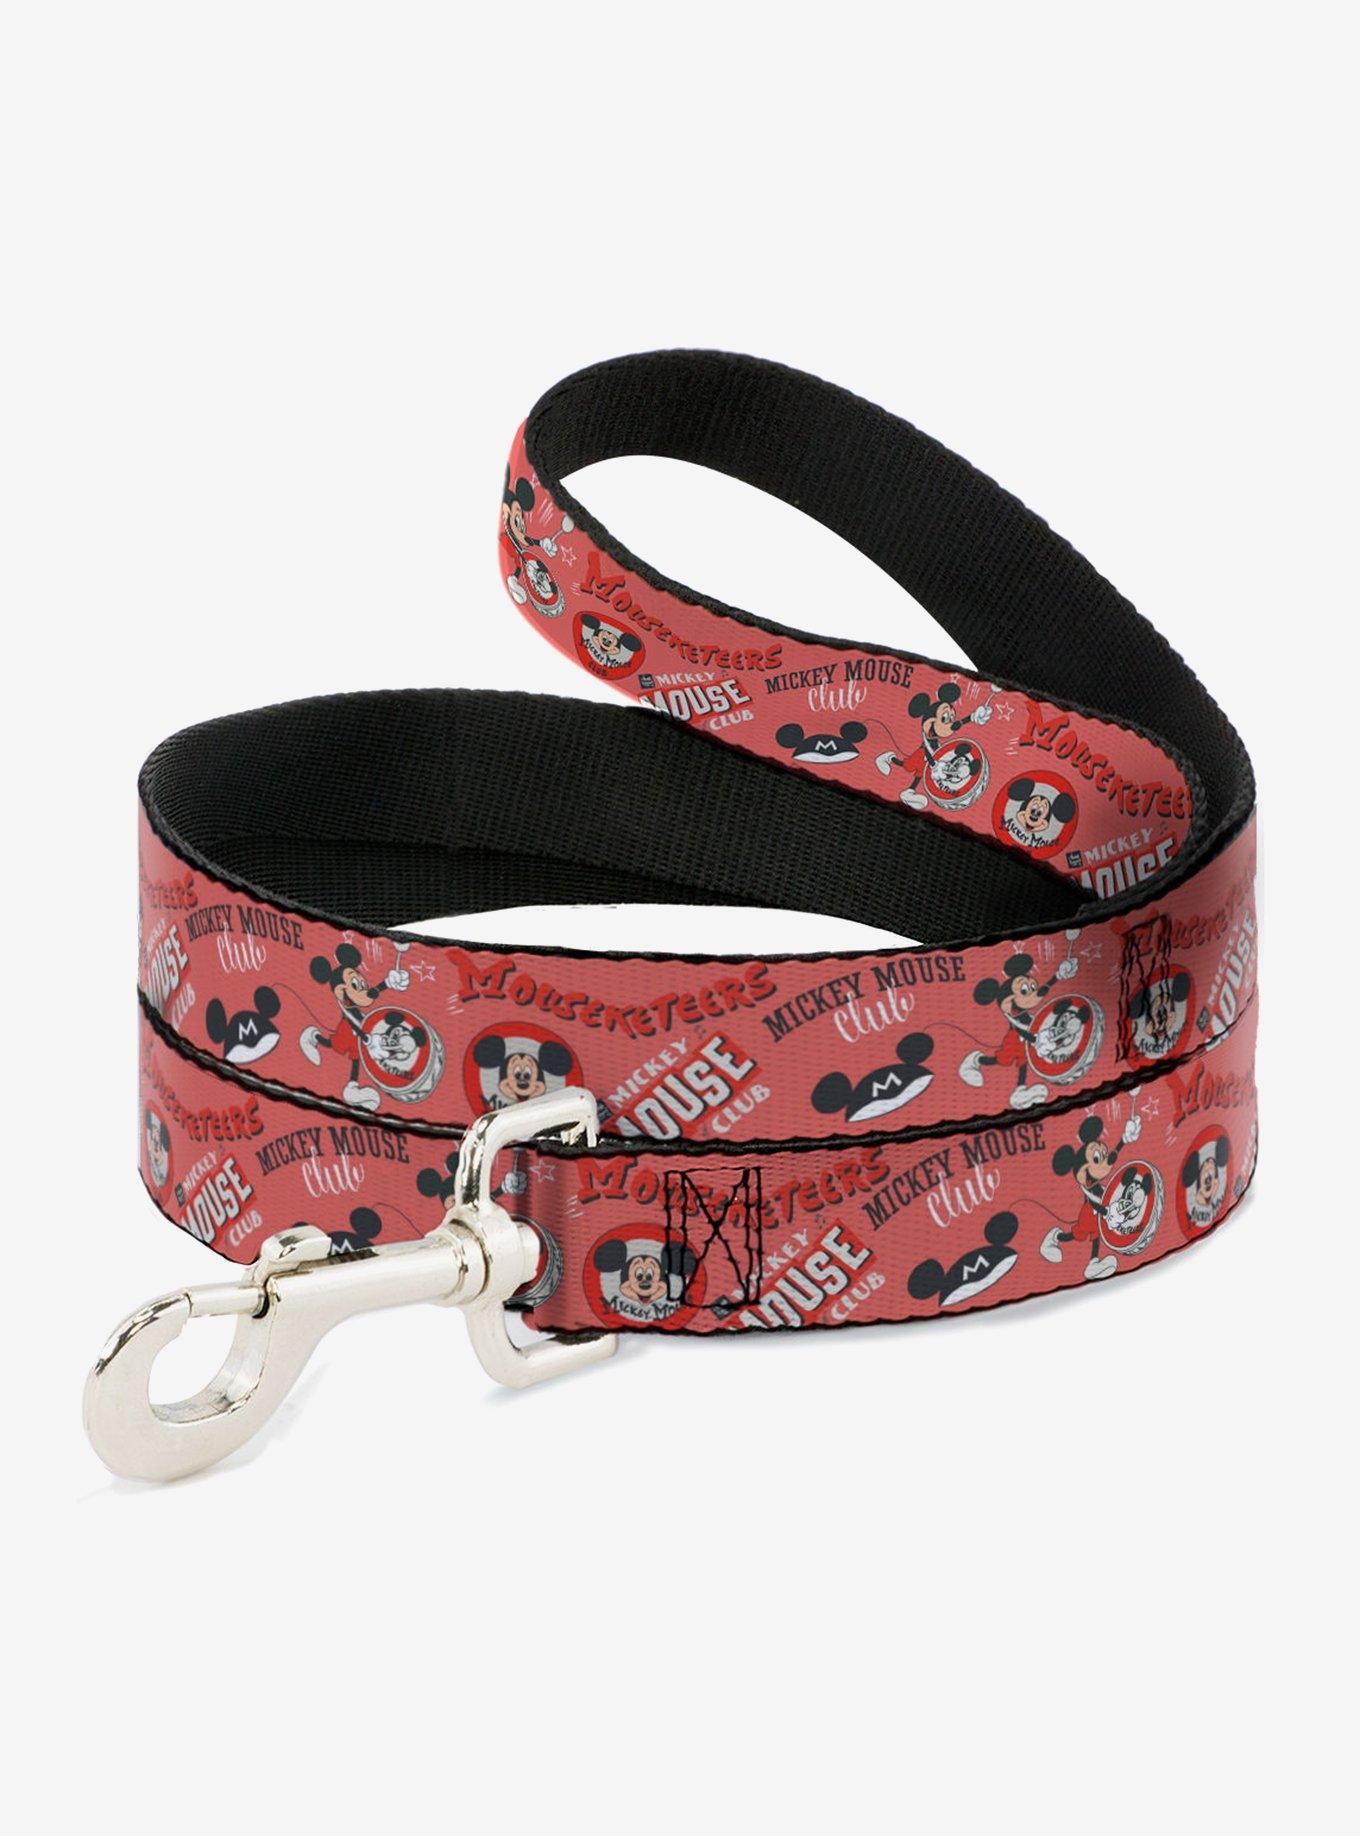 Disney 100 Mickey Mouse Club Collage Dog Leash, RED, hi-res